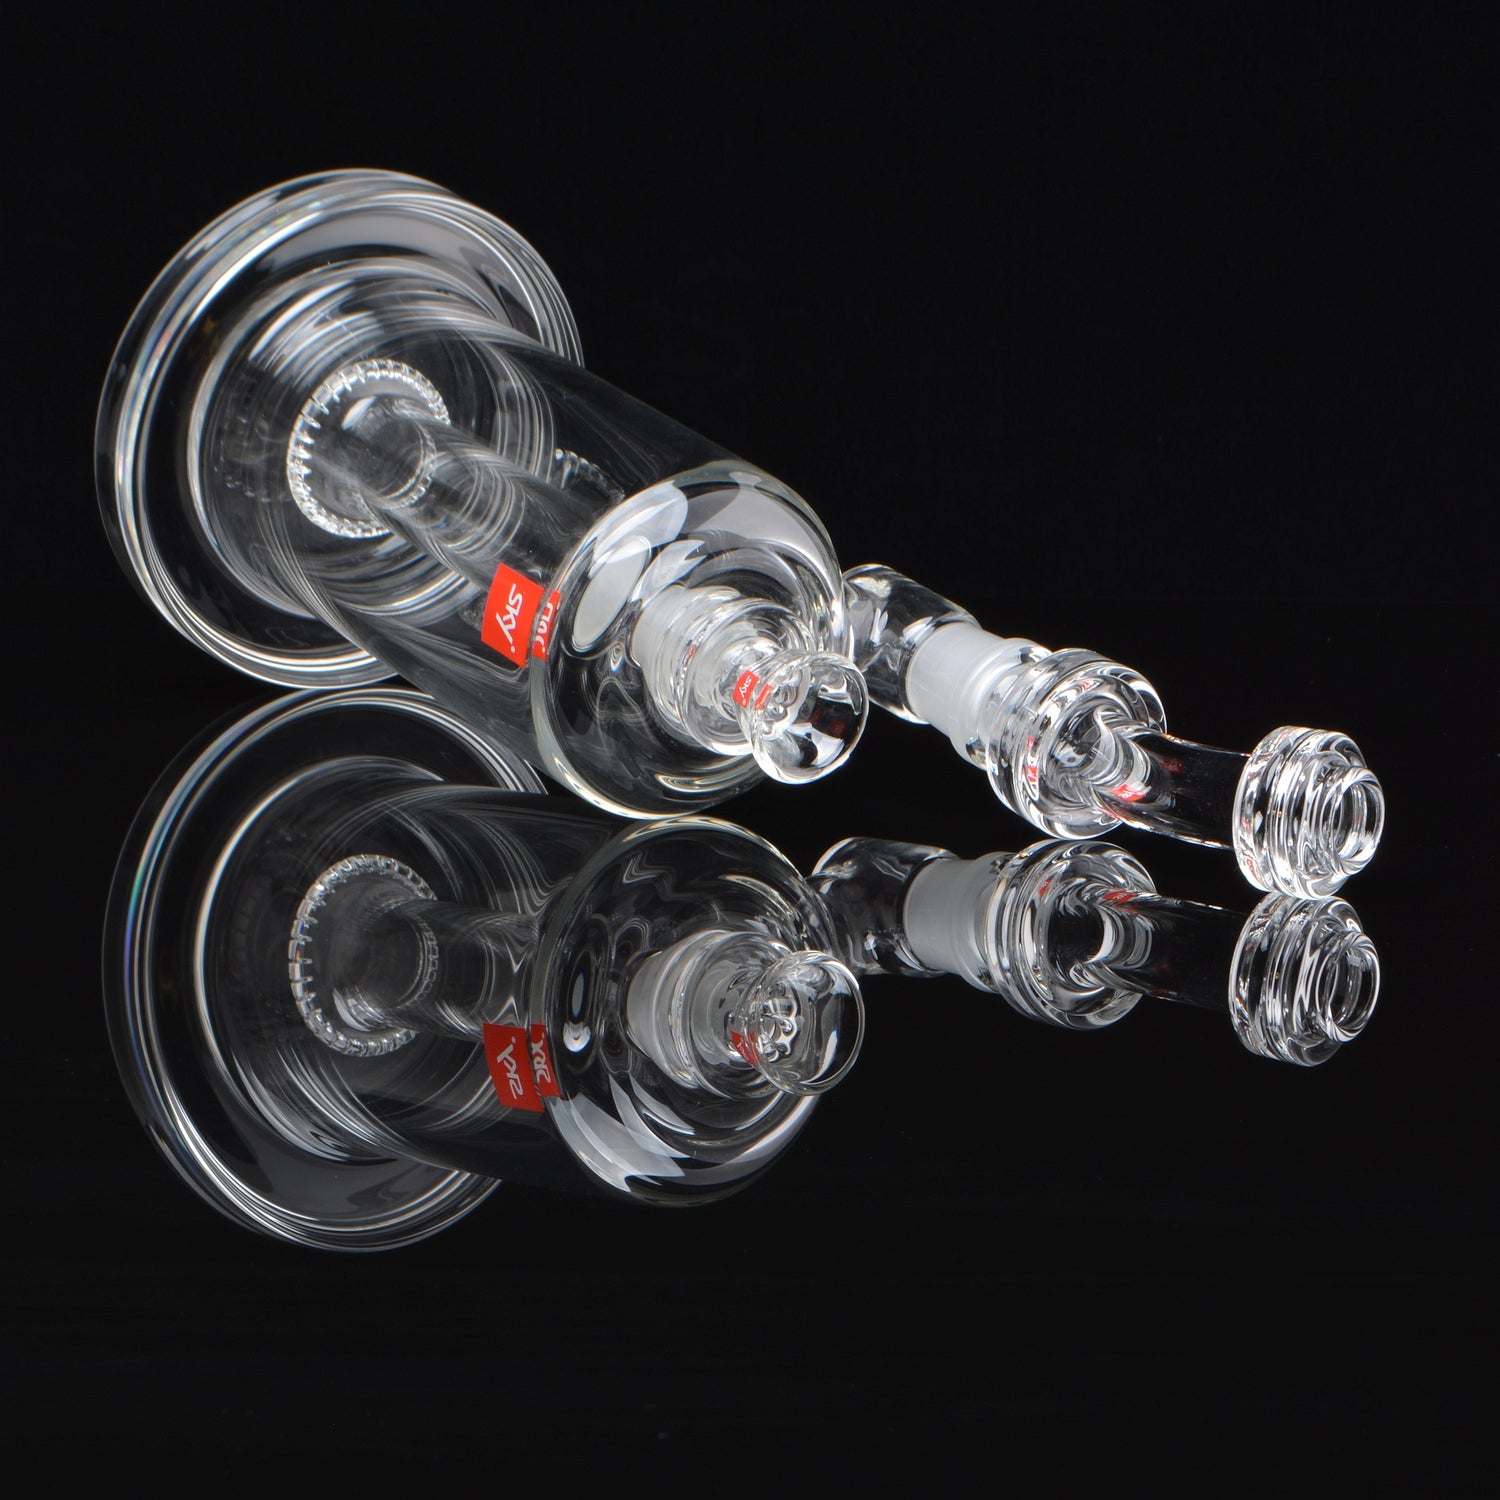 18mm Shower head Bubbler, with a removable mouthpiece, laying on its side, rotated 45 degrees